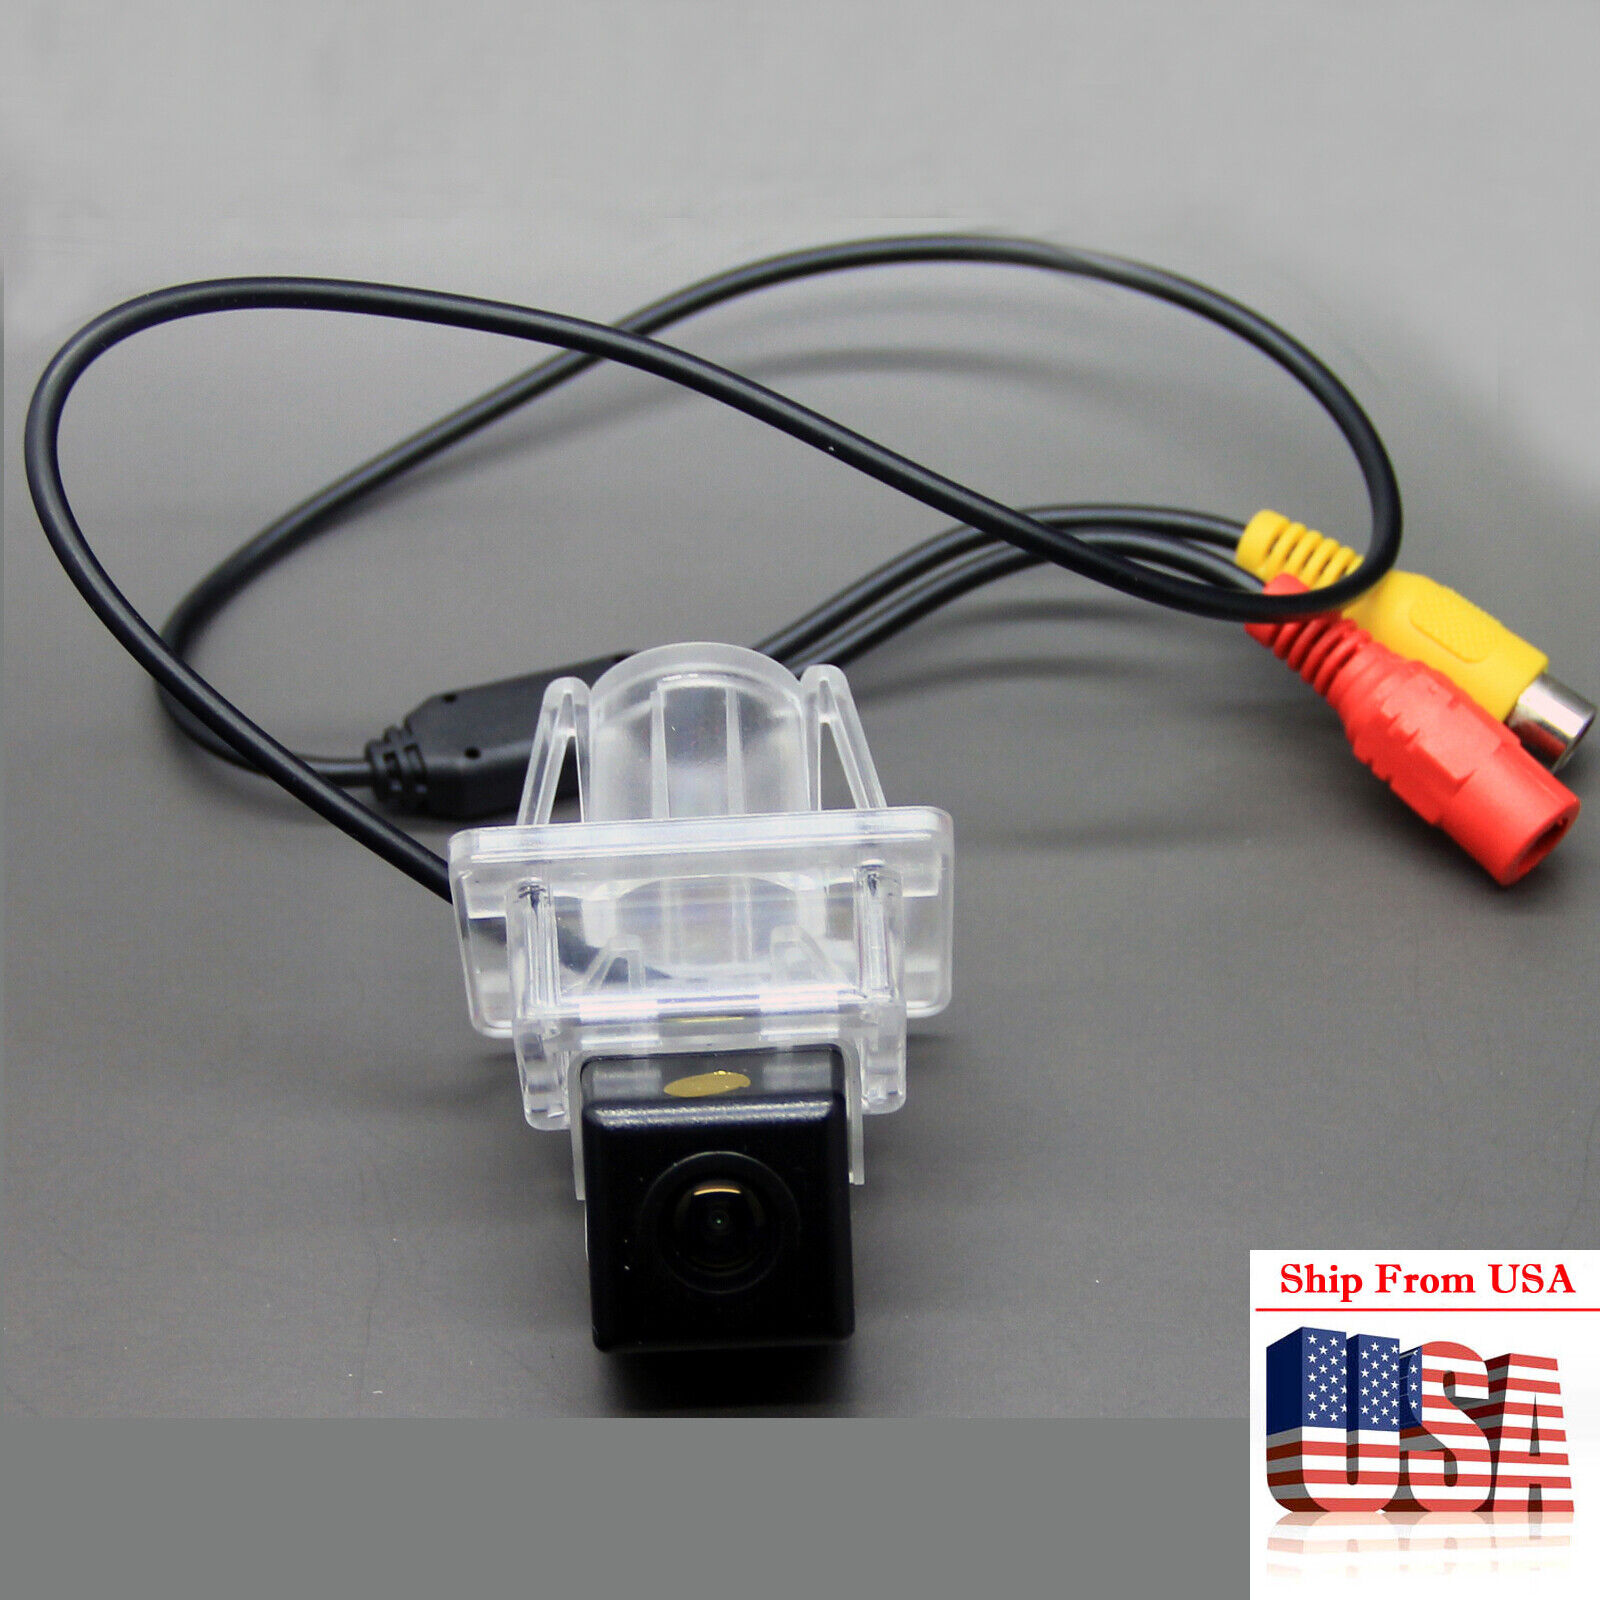 Car Rear View Backup Camera For Mercedes Now on Price reduction sale W221 S S550 Benz V221